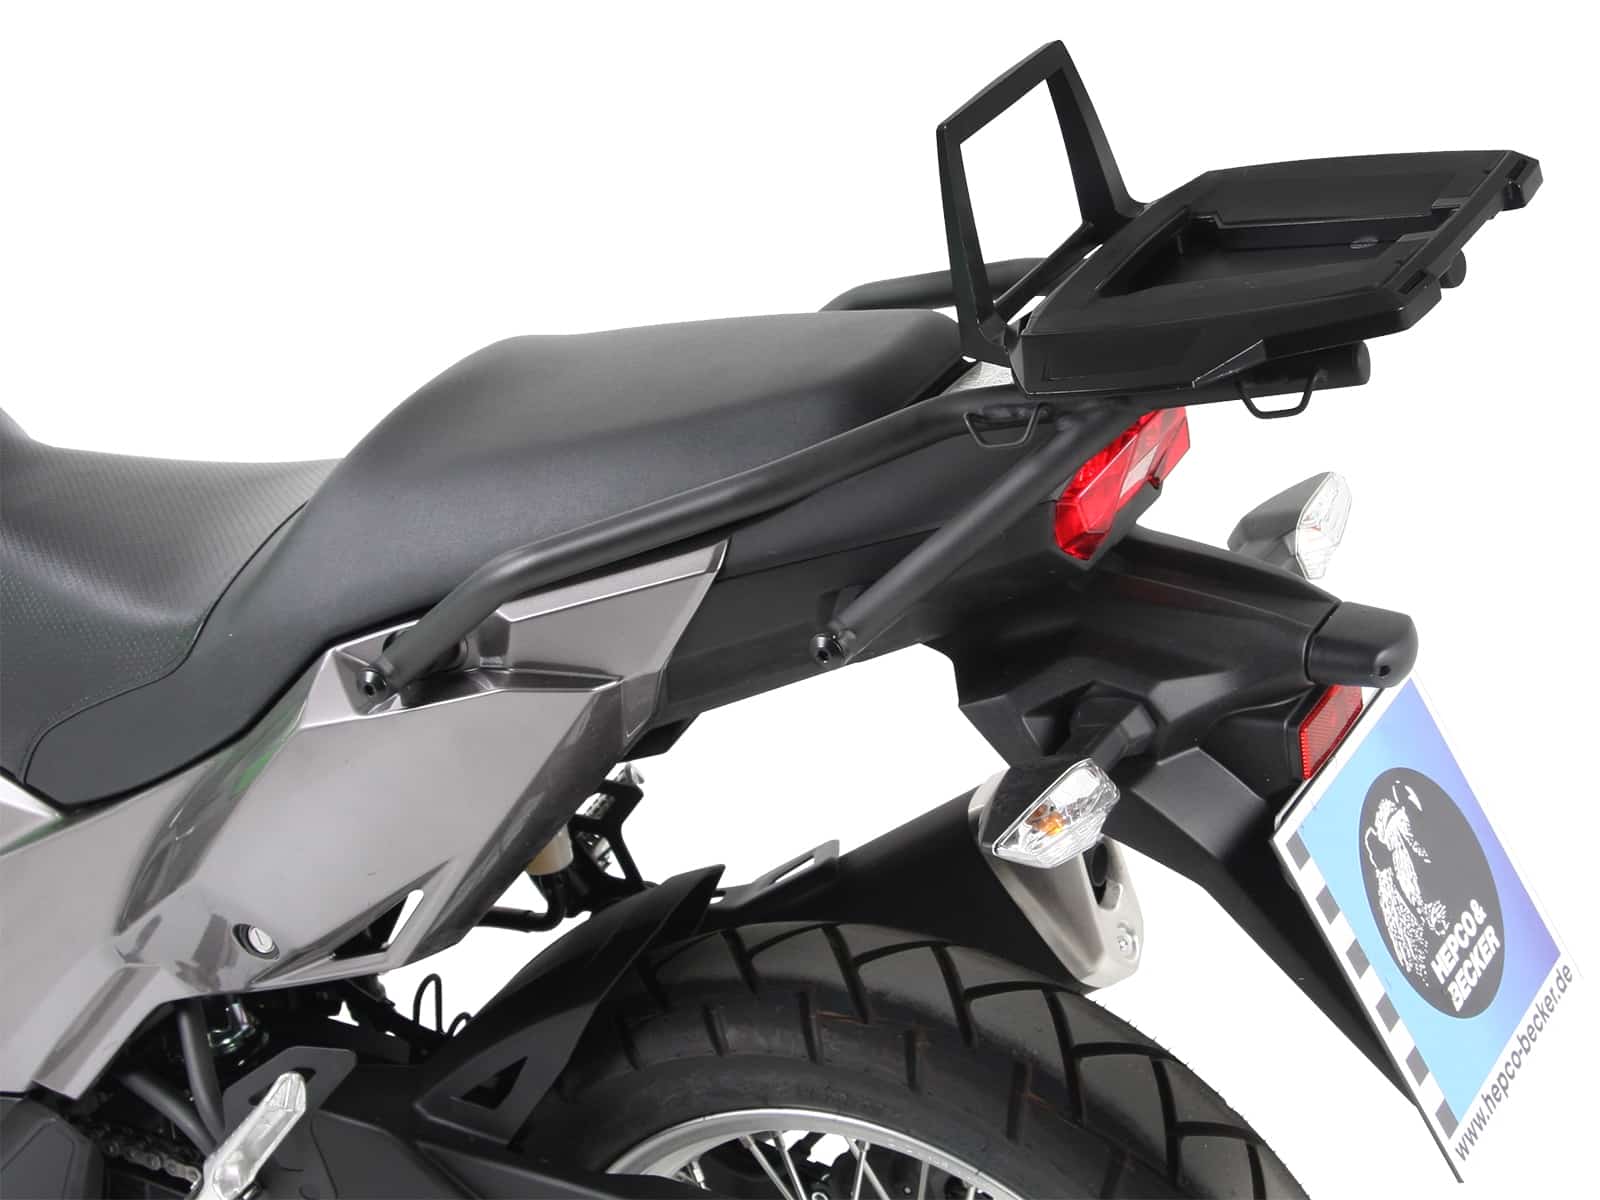 Alurack top case carrier black for combination with original rear rack for Kawasaki Versys-X 300/Urban/Adventure (2017-)